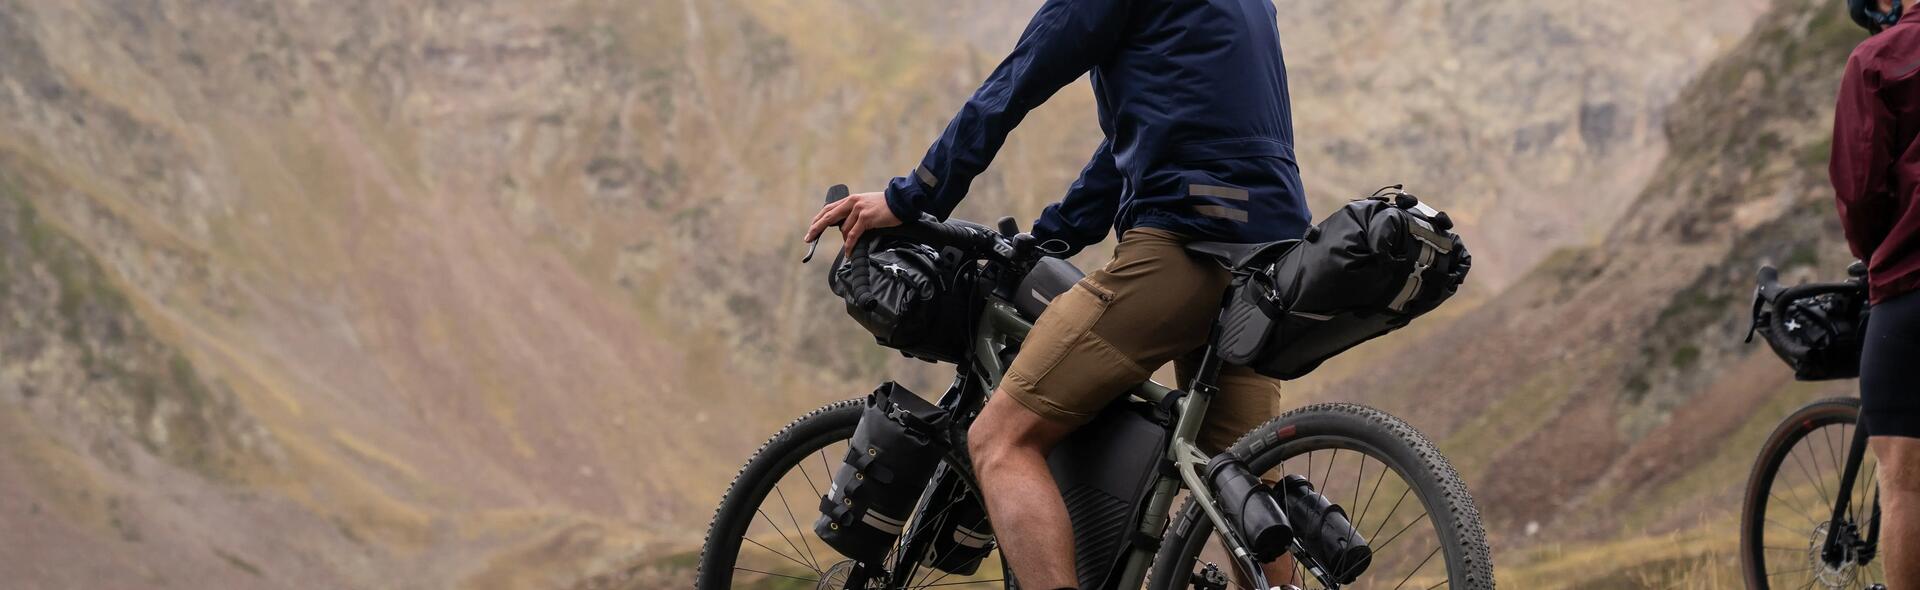 Bikepacking: 15 tips on packing your bags